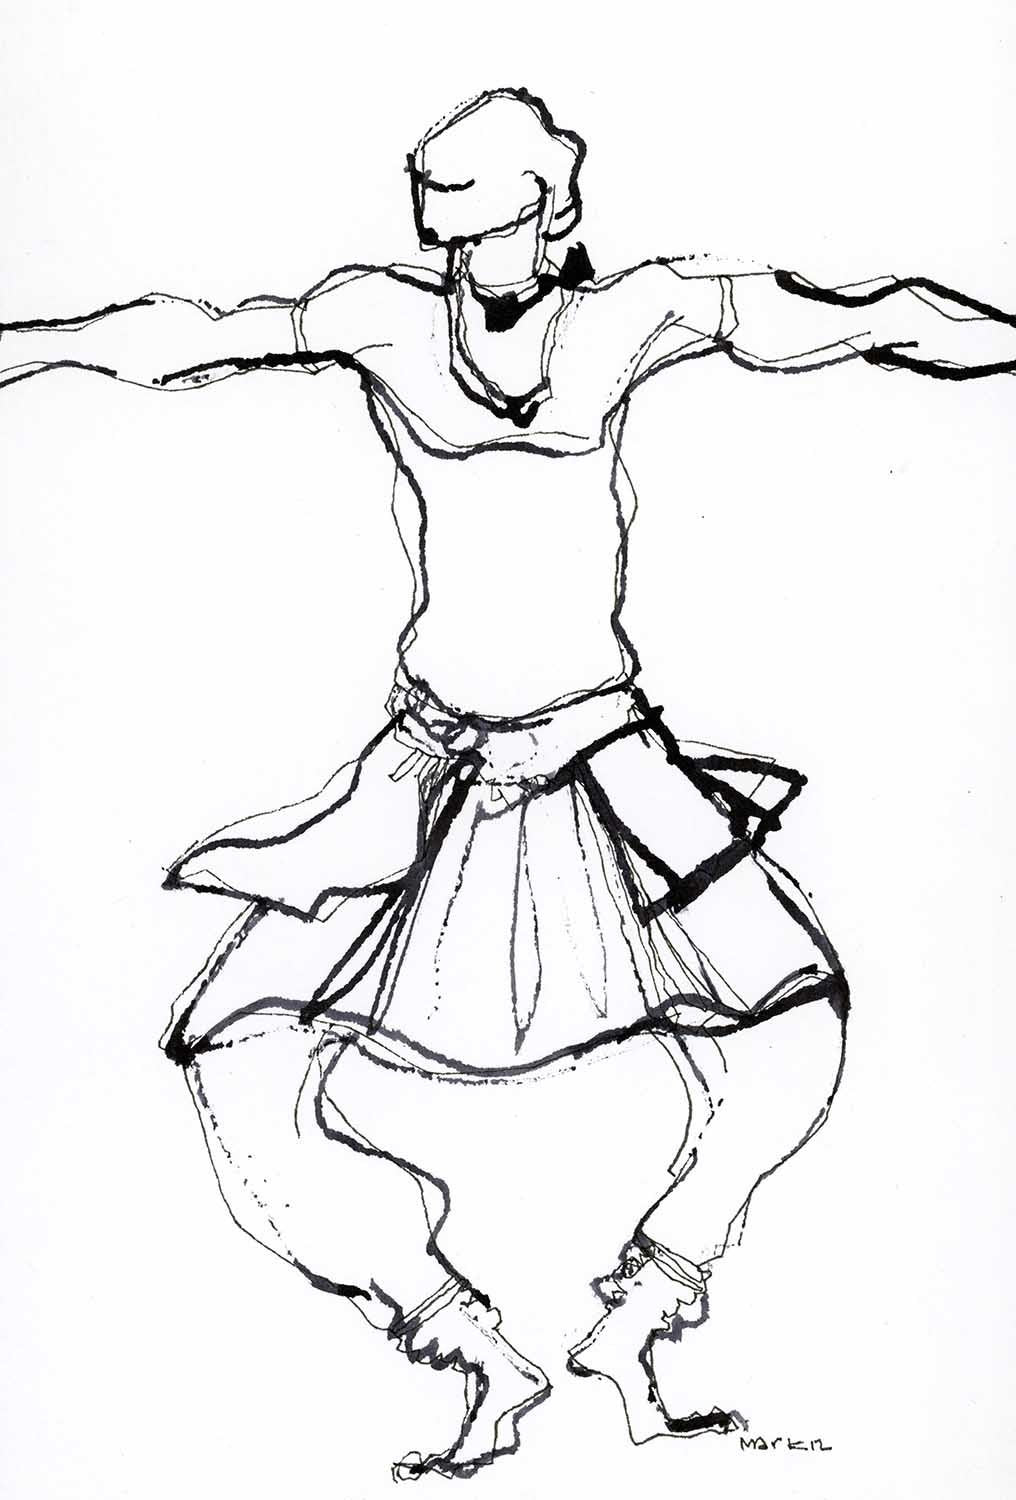 Performer 241|S. Mark Rathinaraj- Pen and Ink on Paper, , 8.5 x 5.5 inches